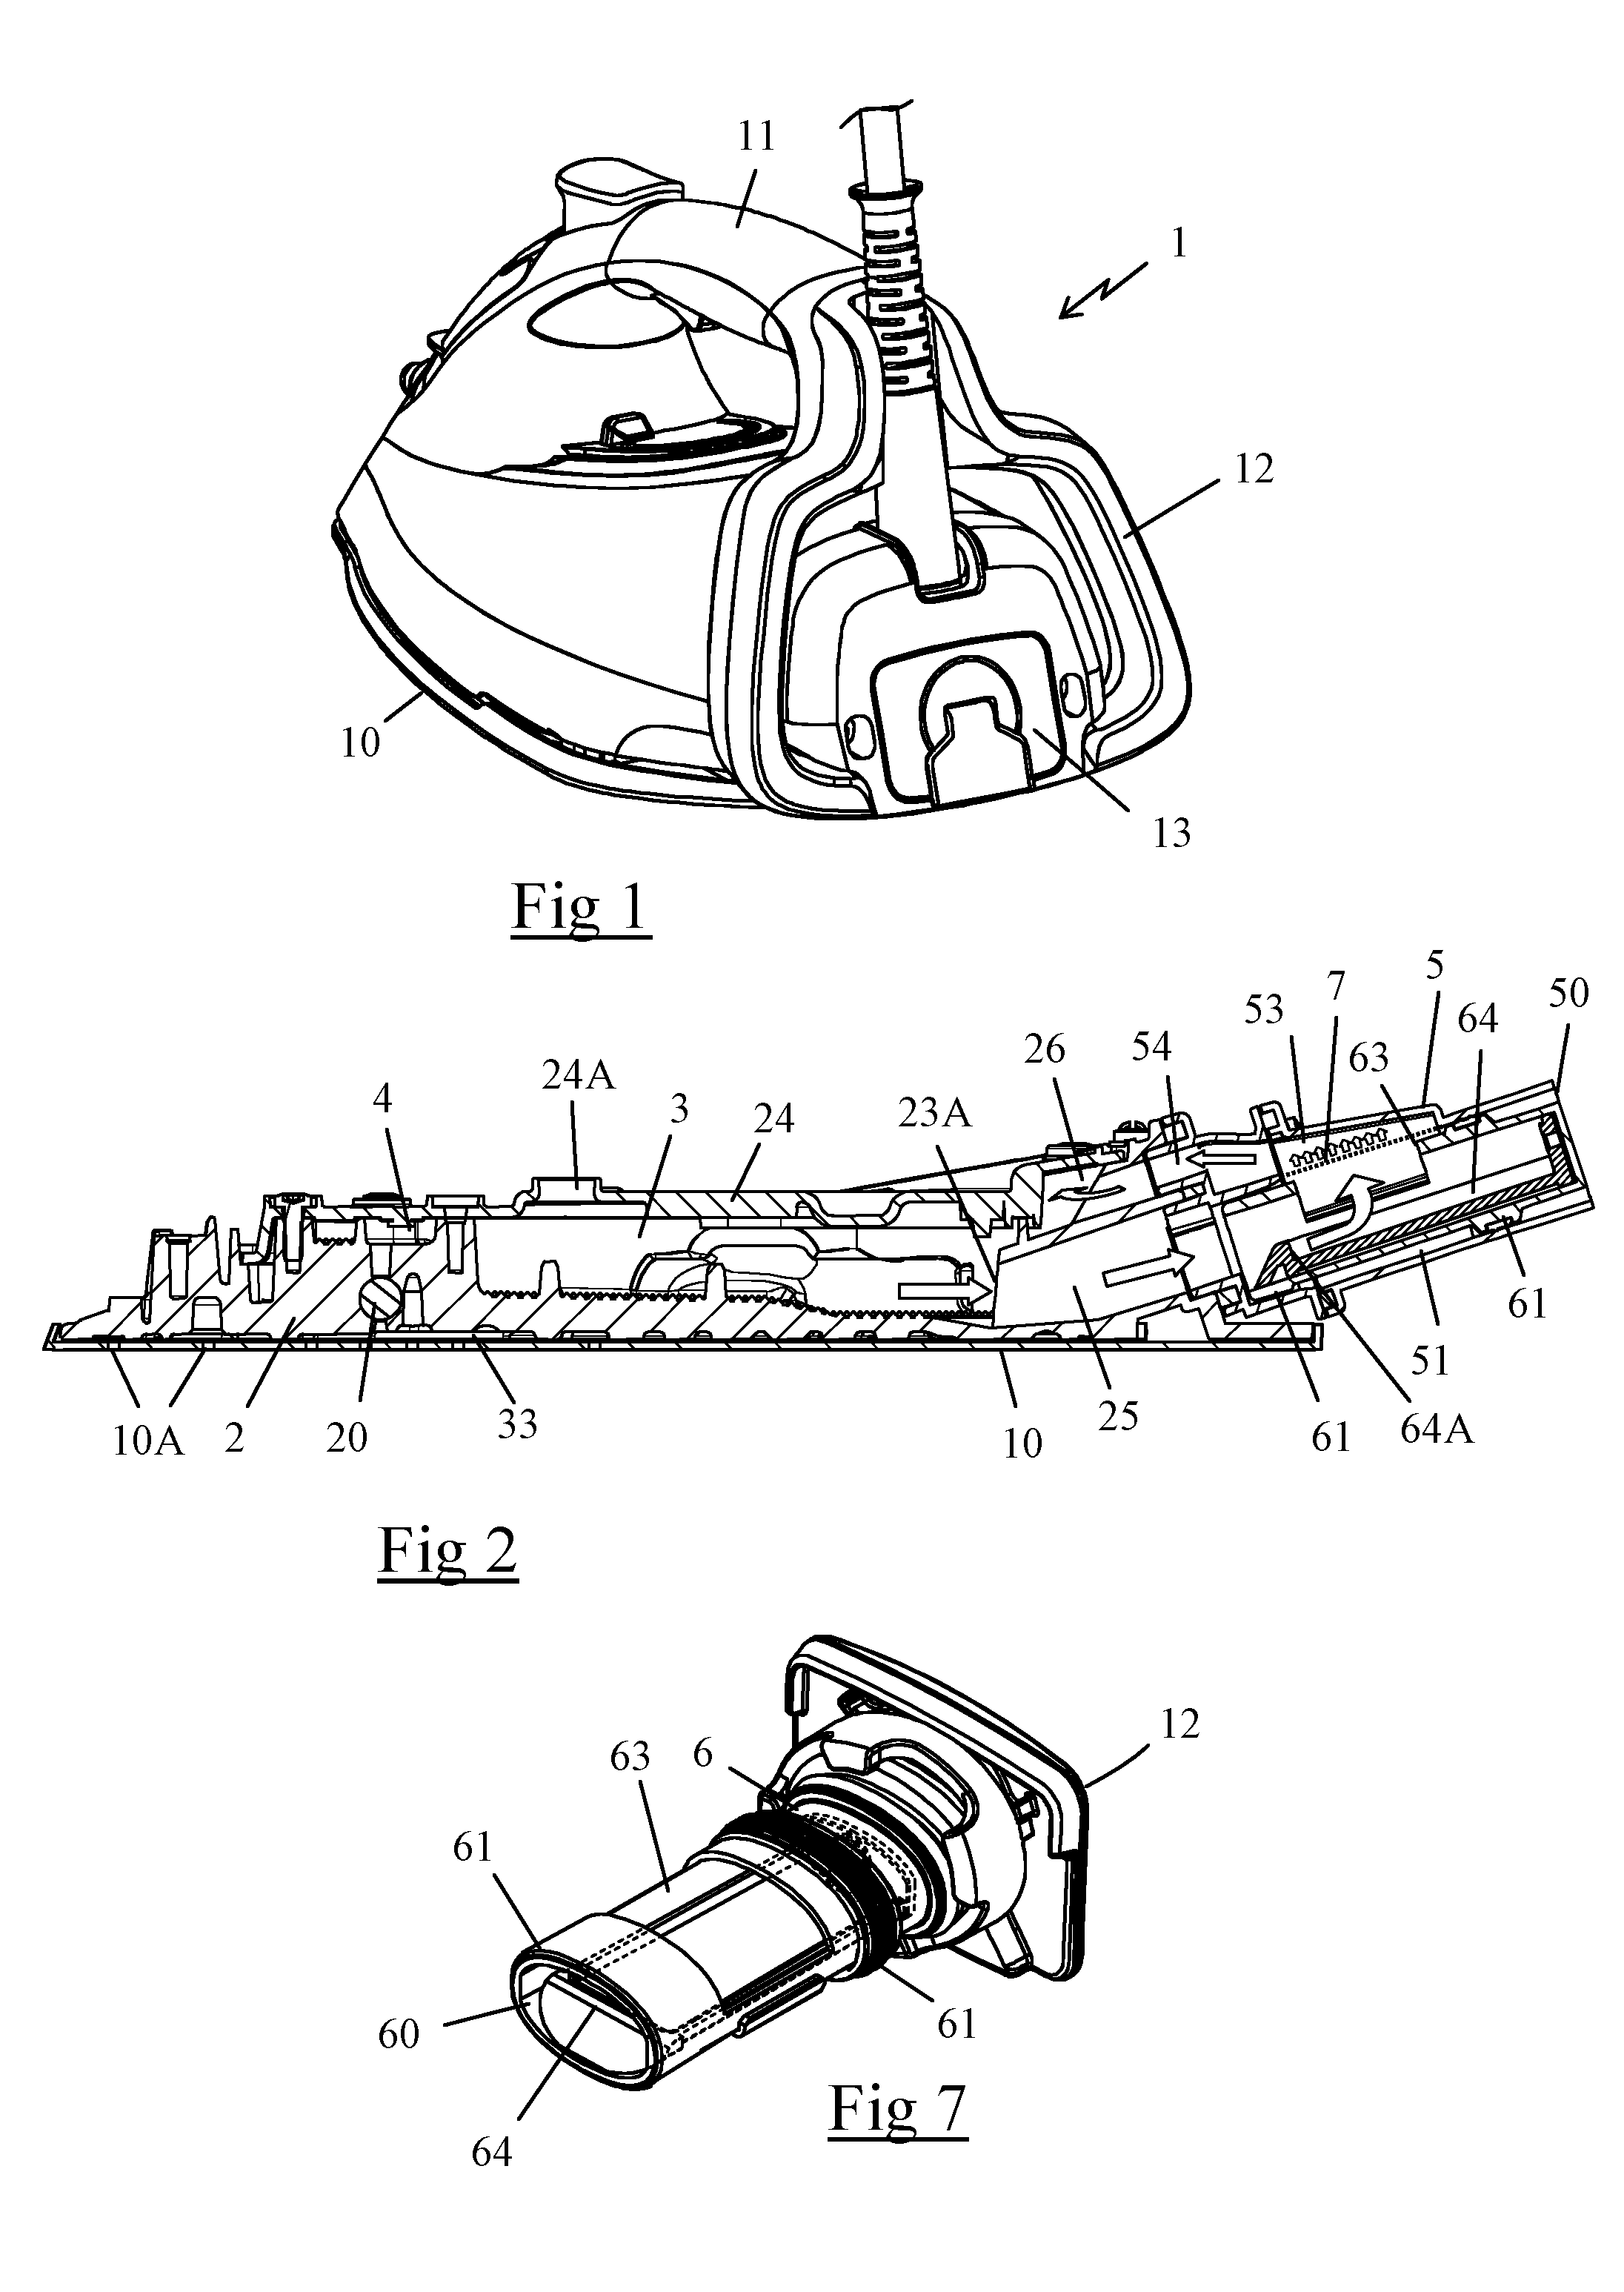 Household Electrical Ironing Appliance Comprising a Filter Designed to Retain Lime Scale Particles Transported by the Steam